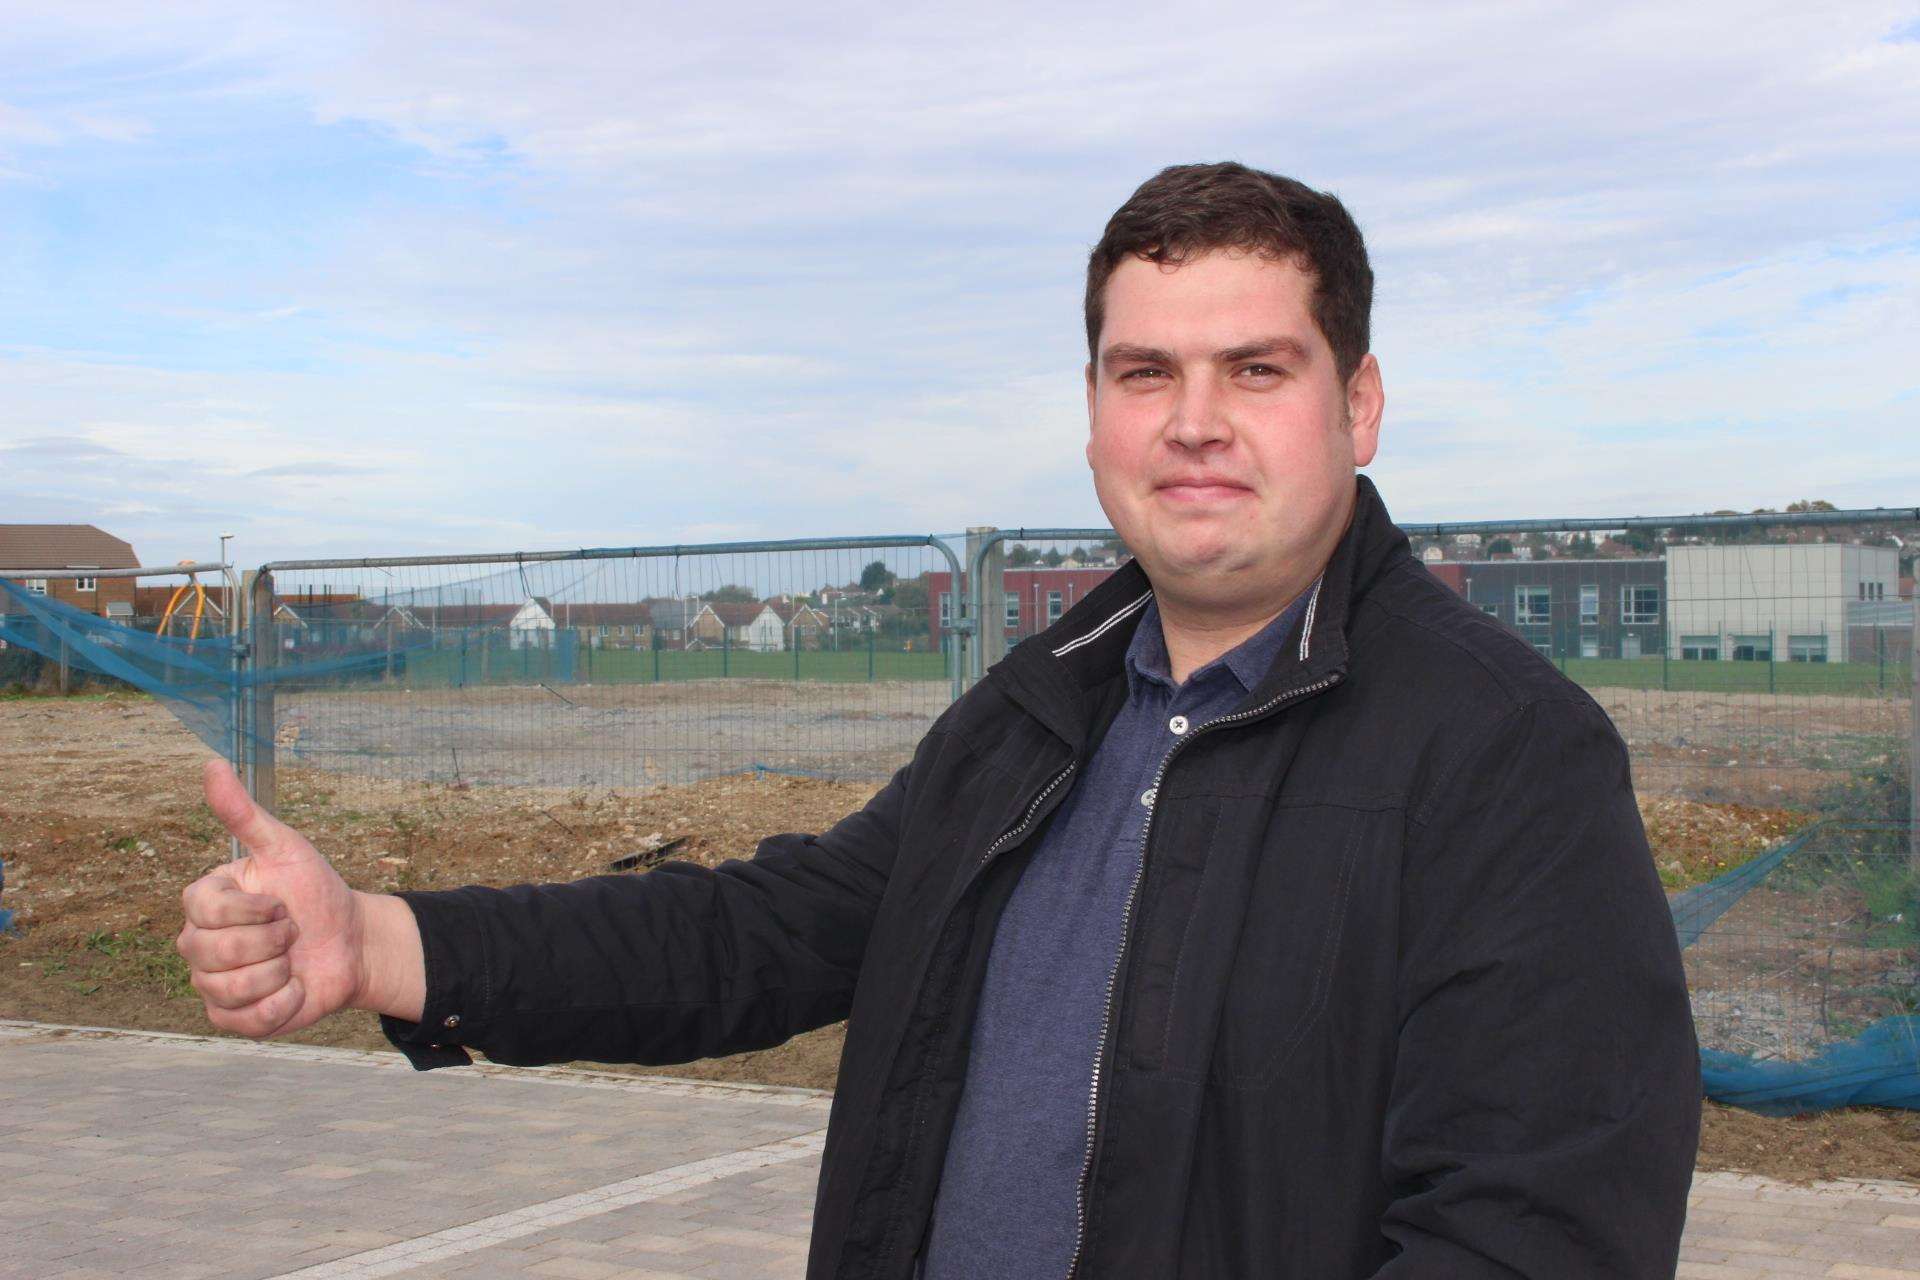 Cllr Elliott Jayes has welcomed the news a Co-op store will soon be opening at Thistle Hill in Minster